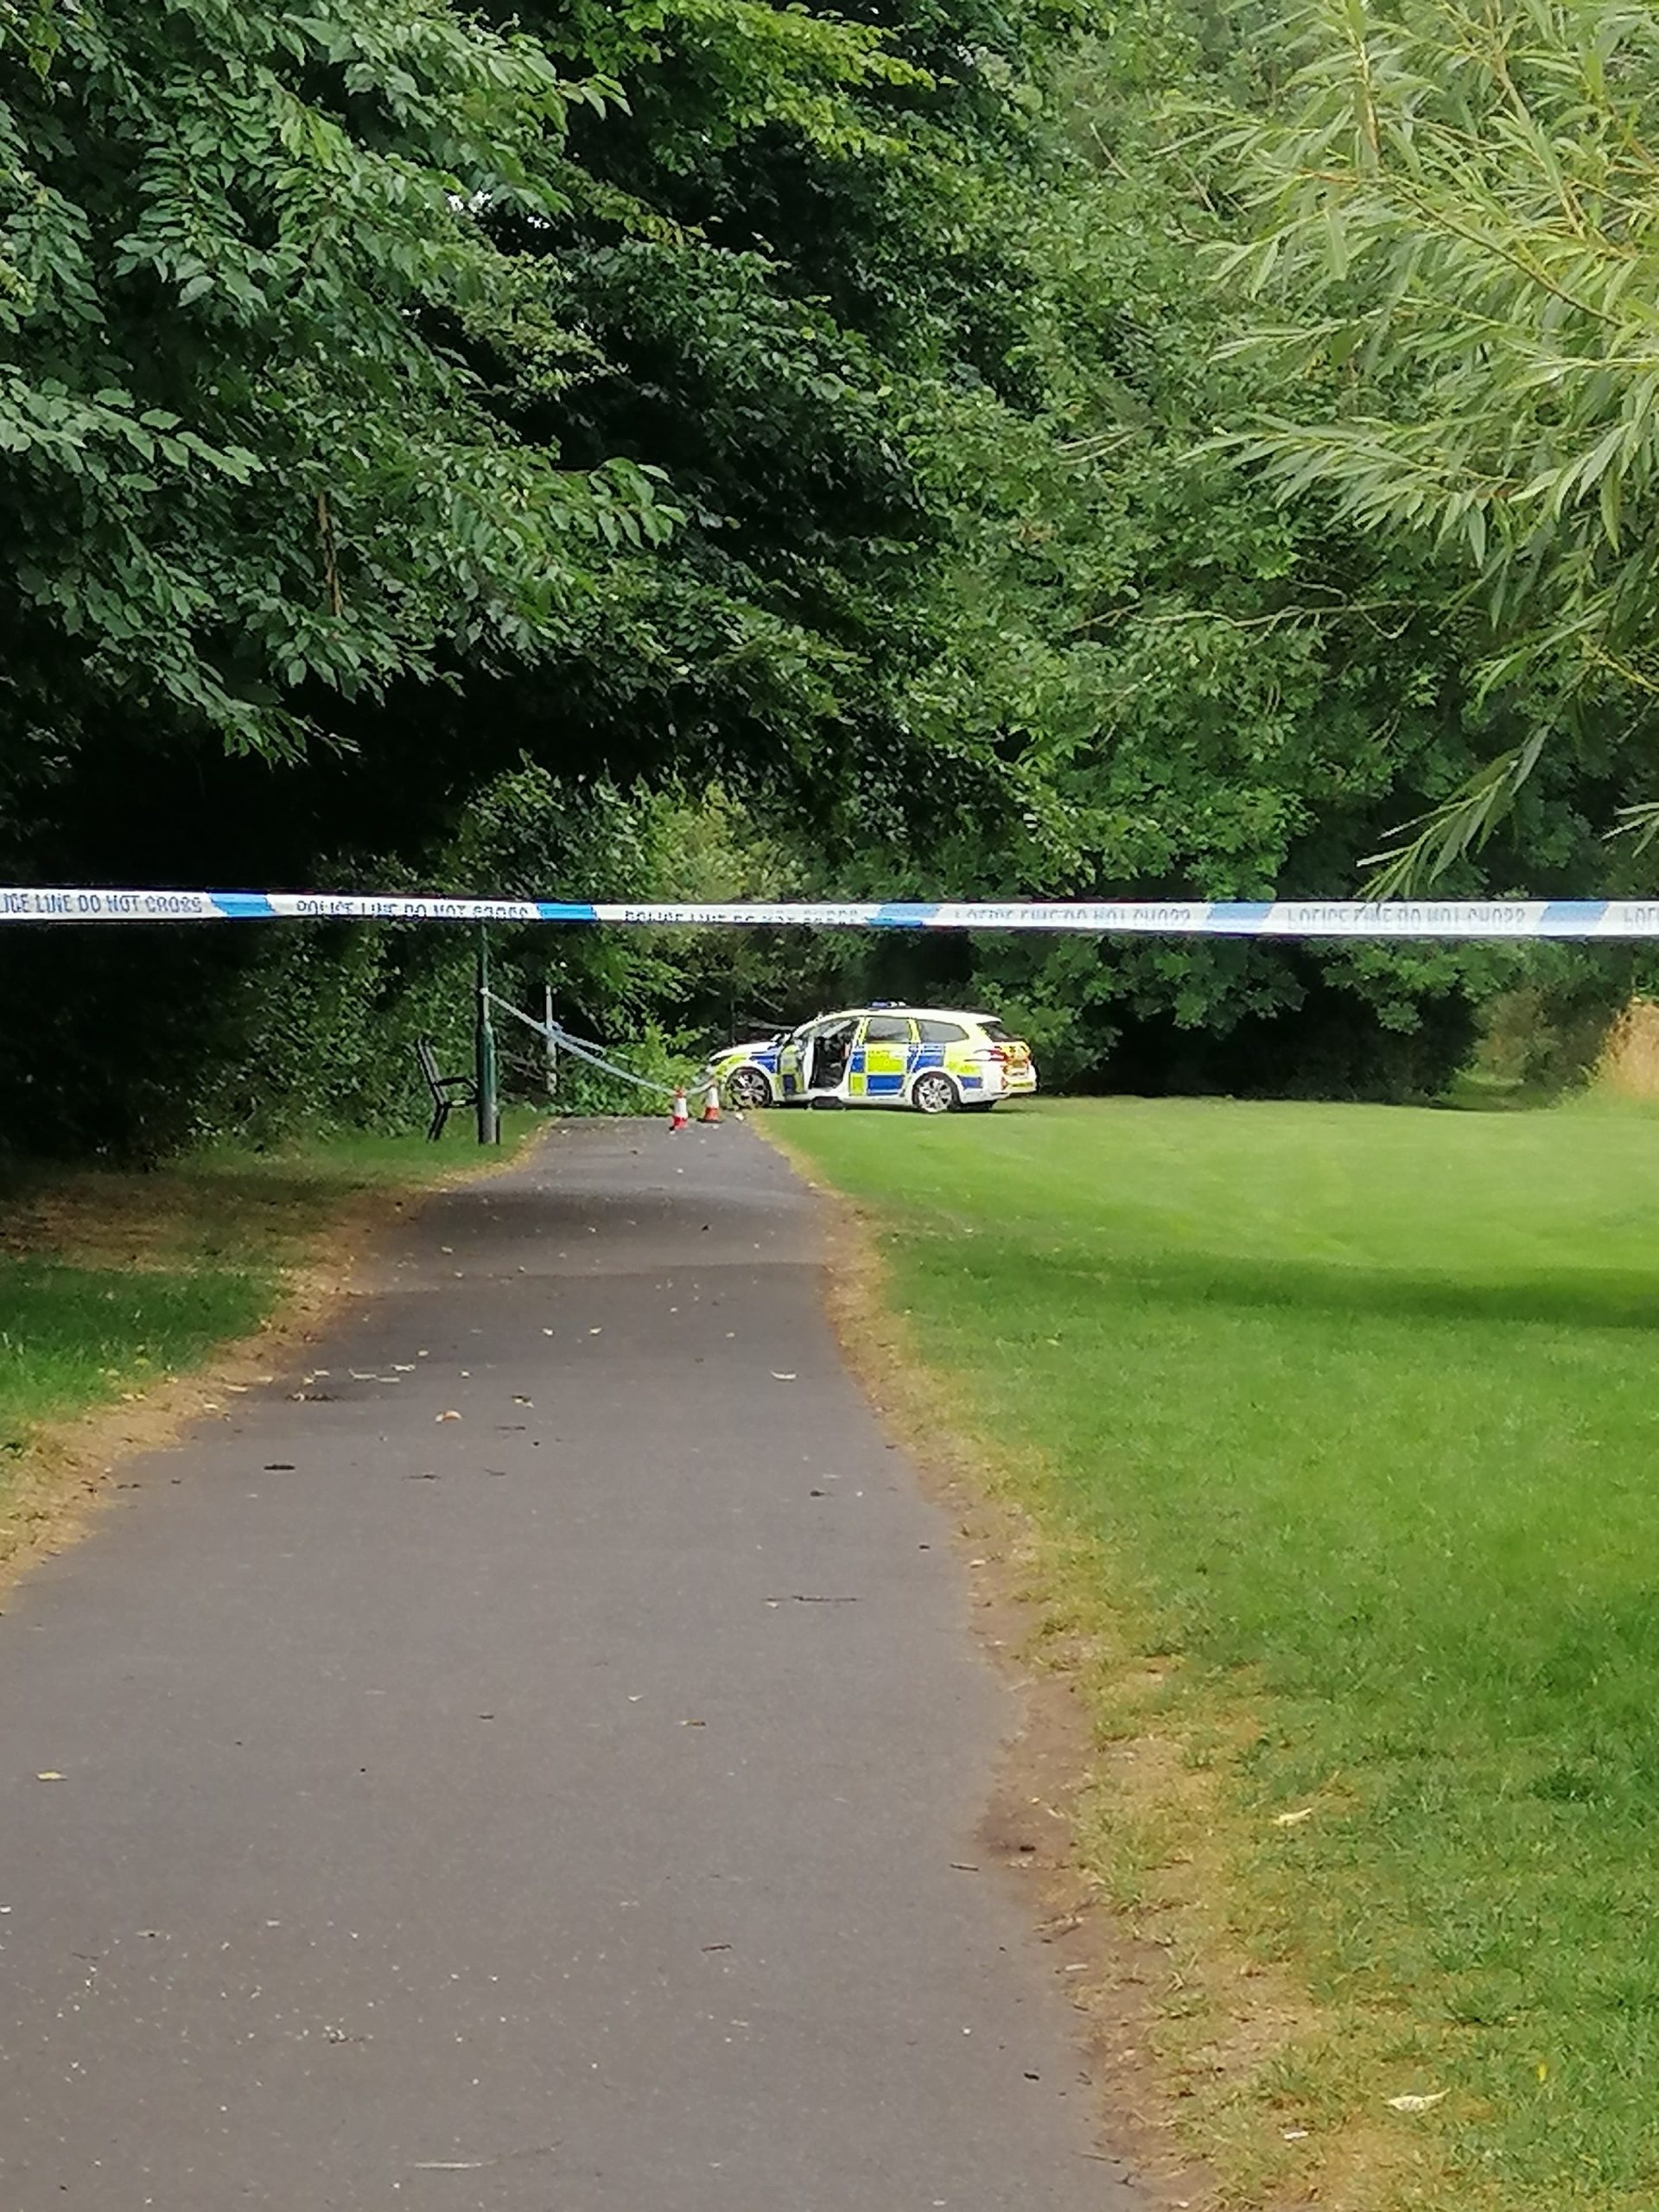 LATEST | Rape investigation continues in Hereford after arrest was made earlier this week